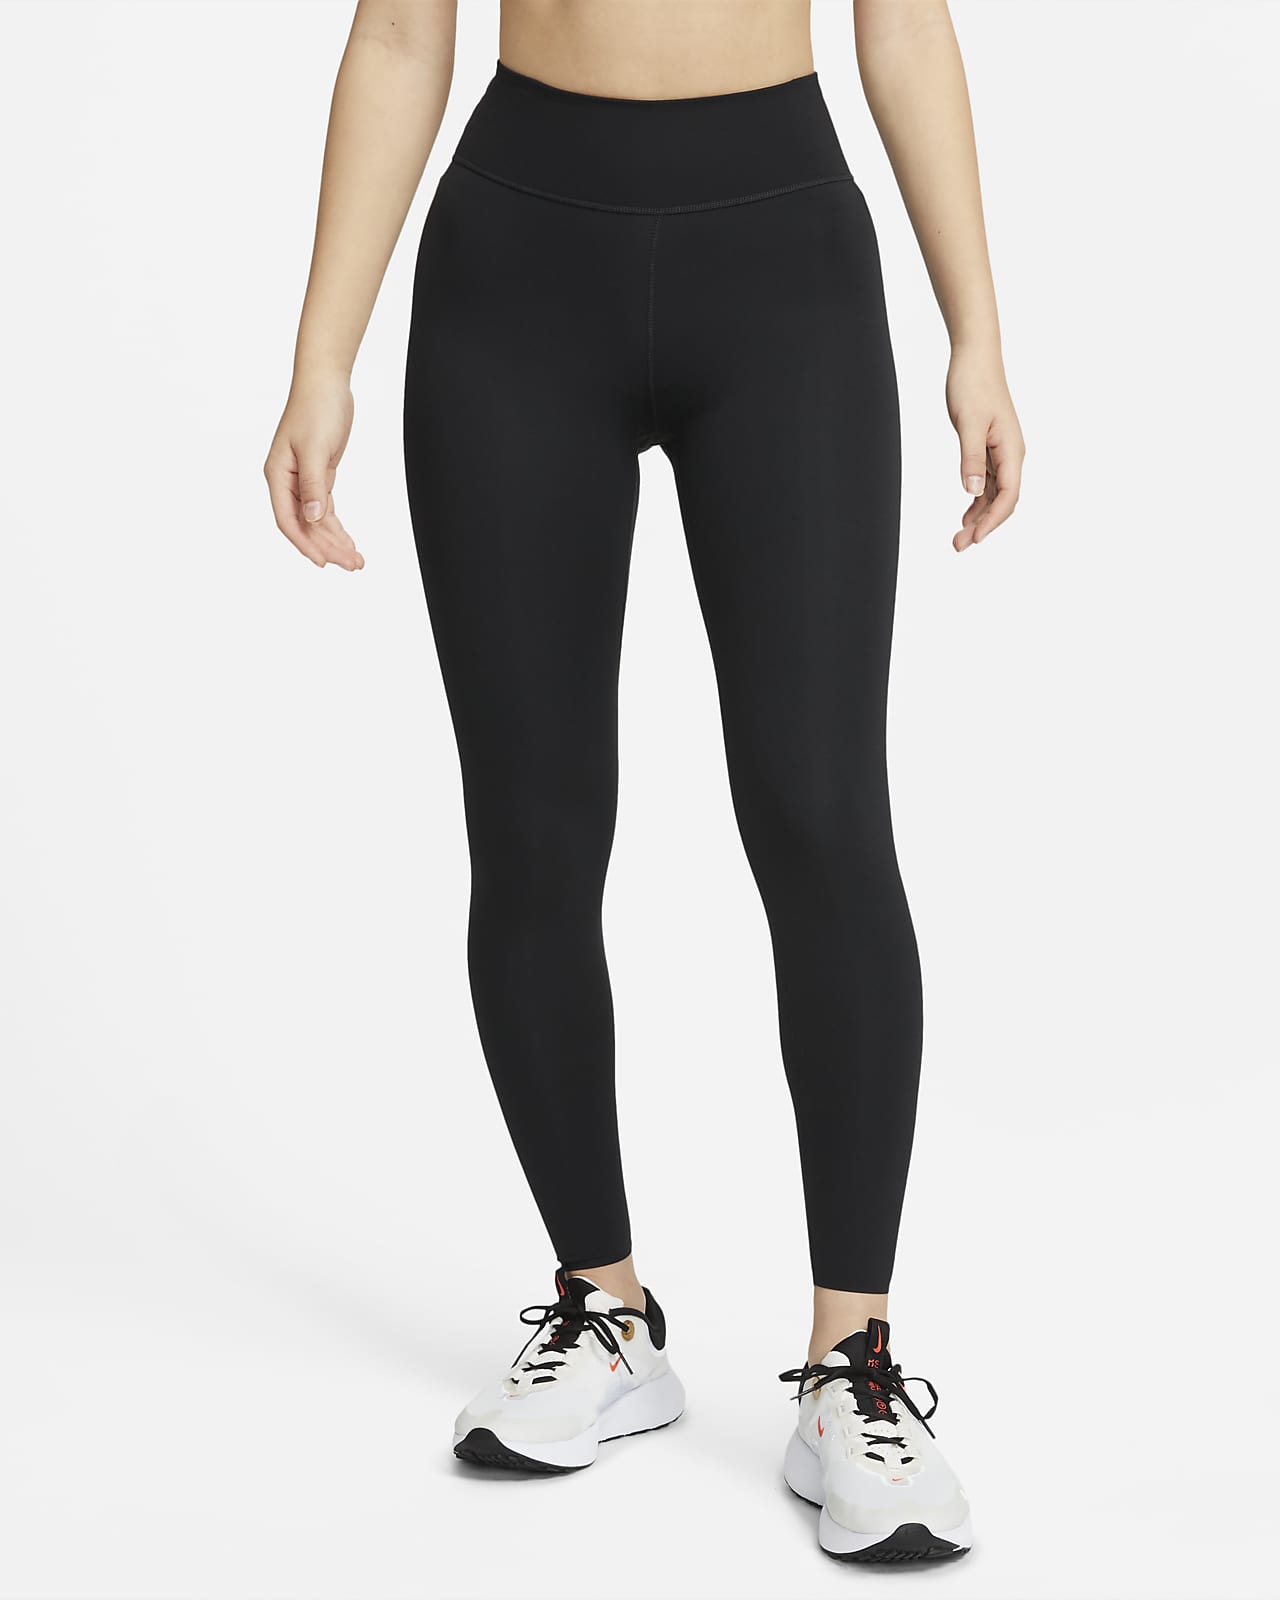 4 Cute Workout Outfits for Women Nike IN